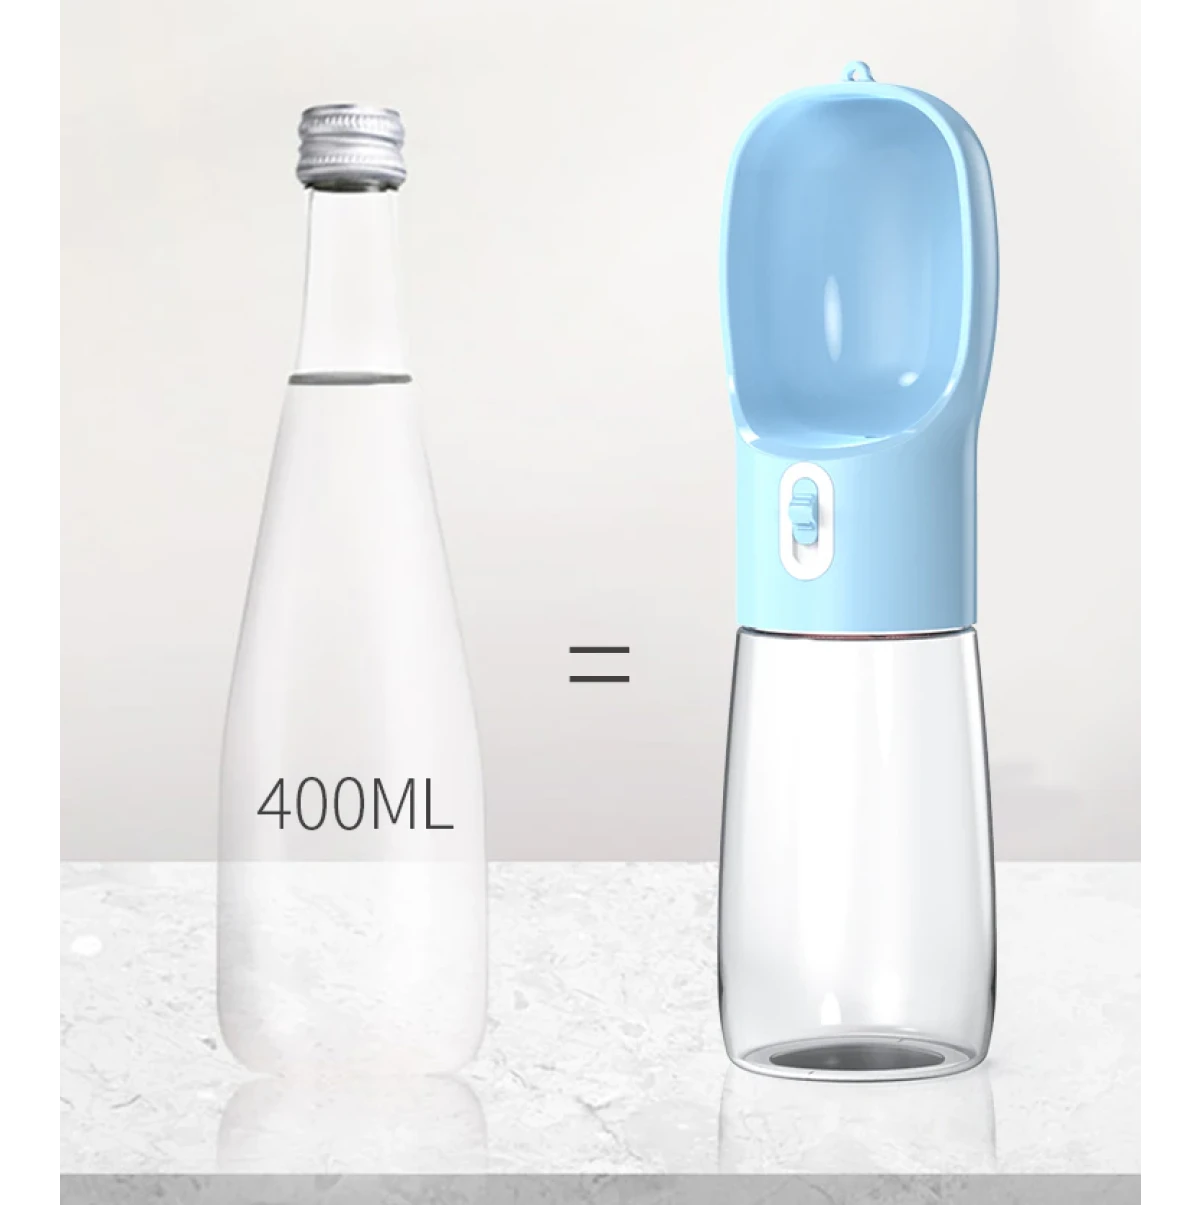 A Water bottle for pets